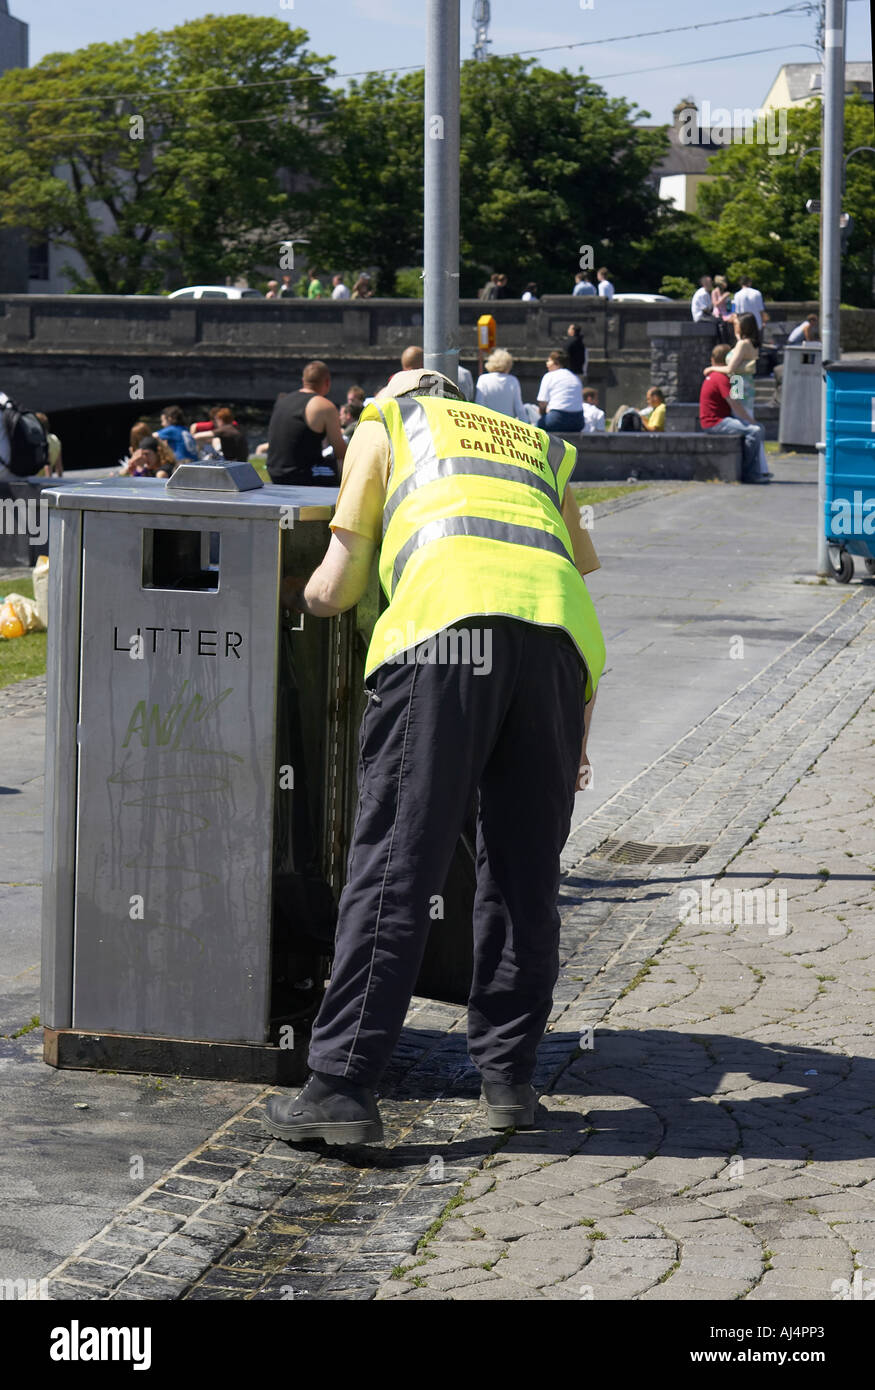 galway city council worker in luminous yellow clothing with irish gaelic writing empties litter bin Galway city Stock Photo